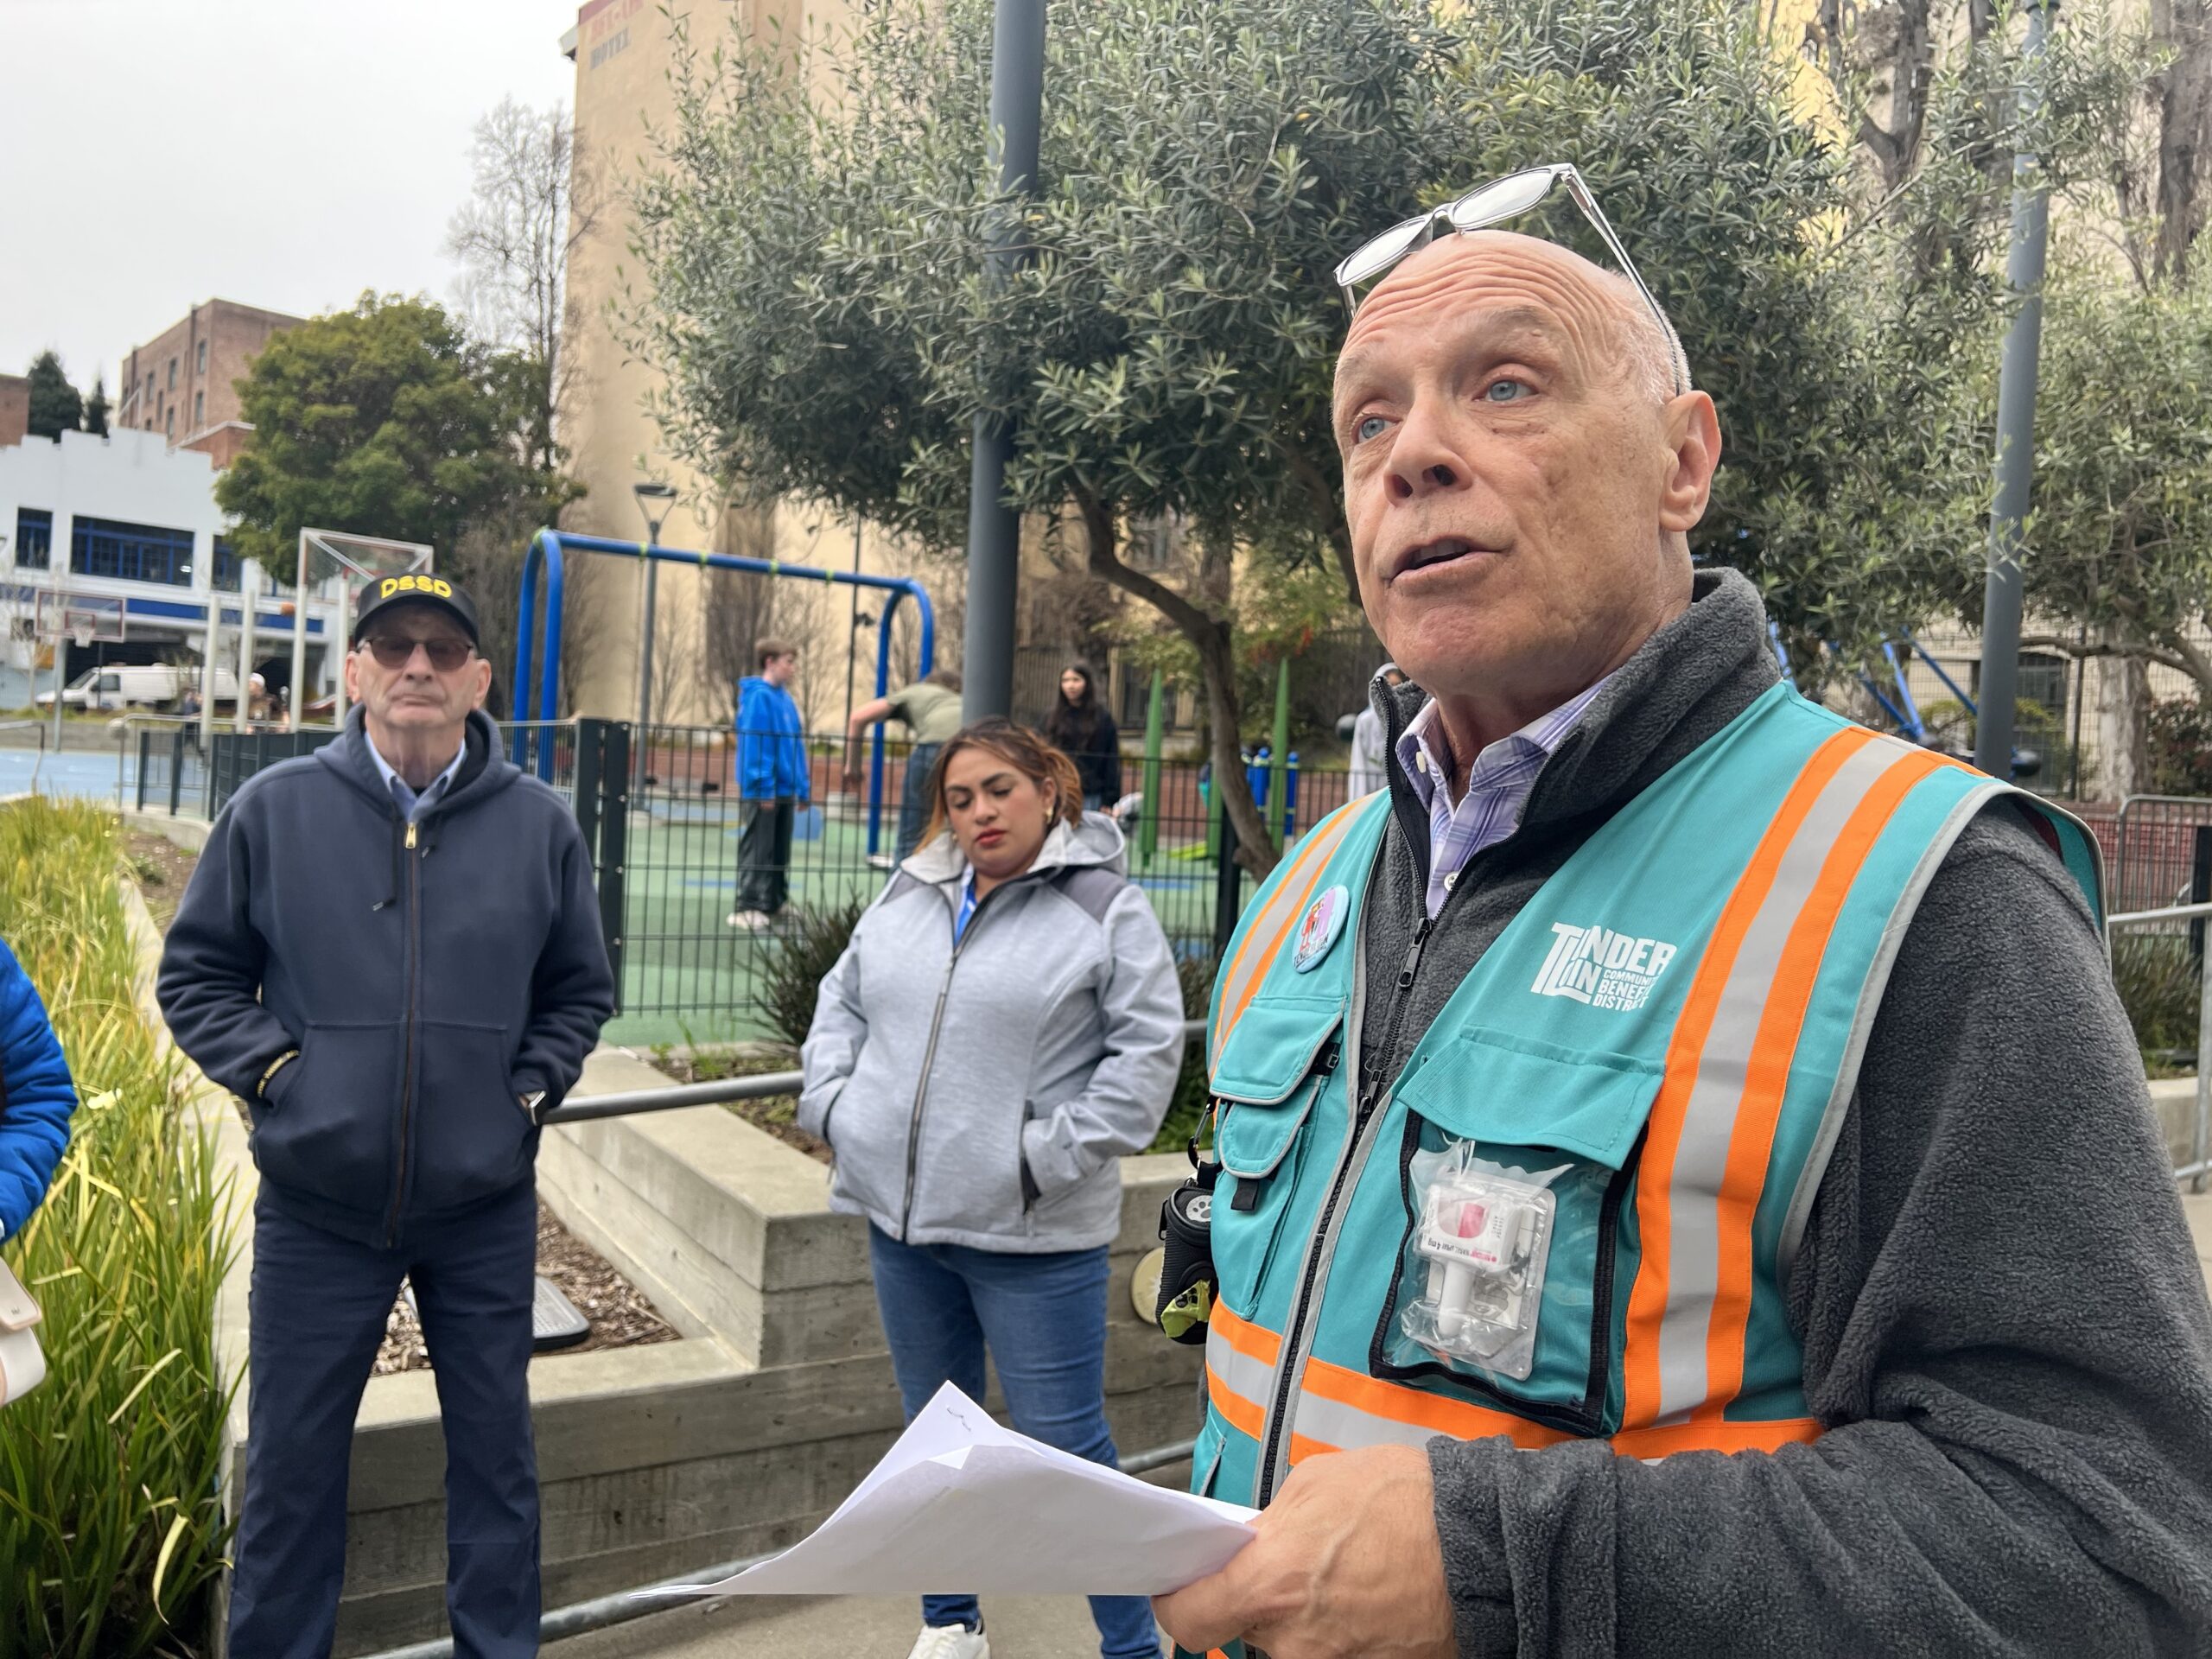 A man in a safety vest speaks to a group.